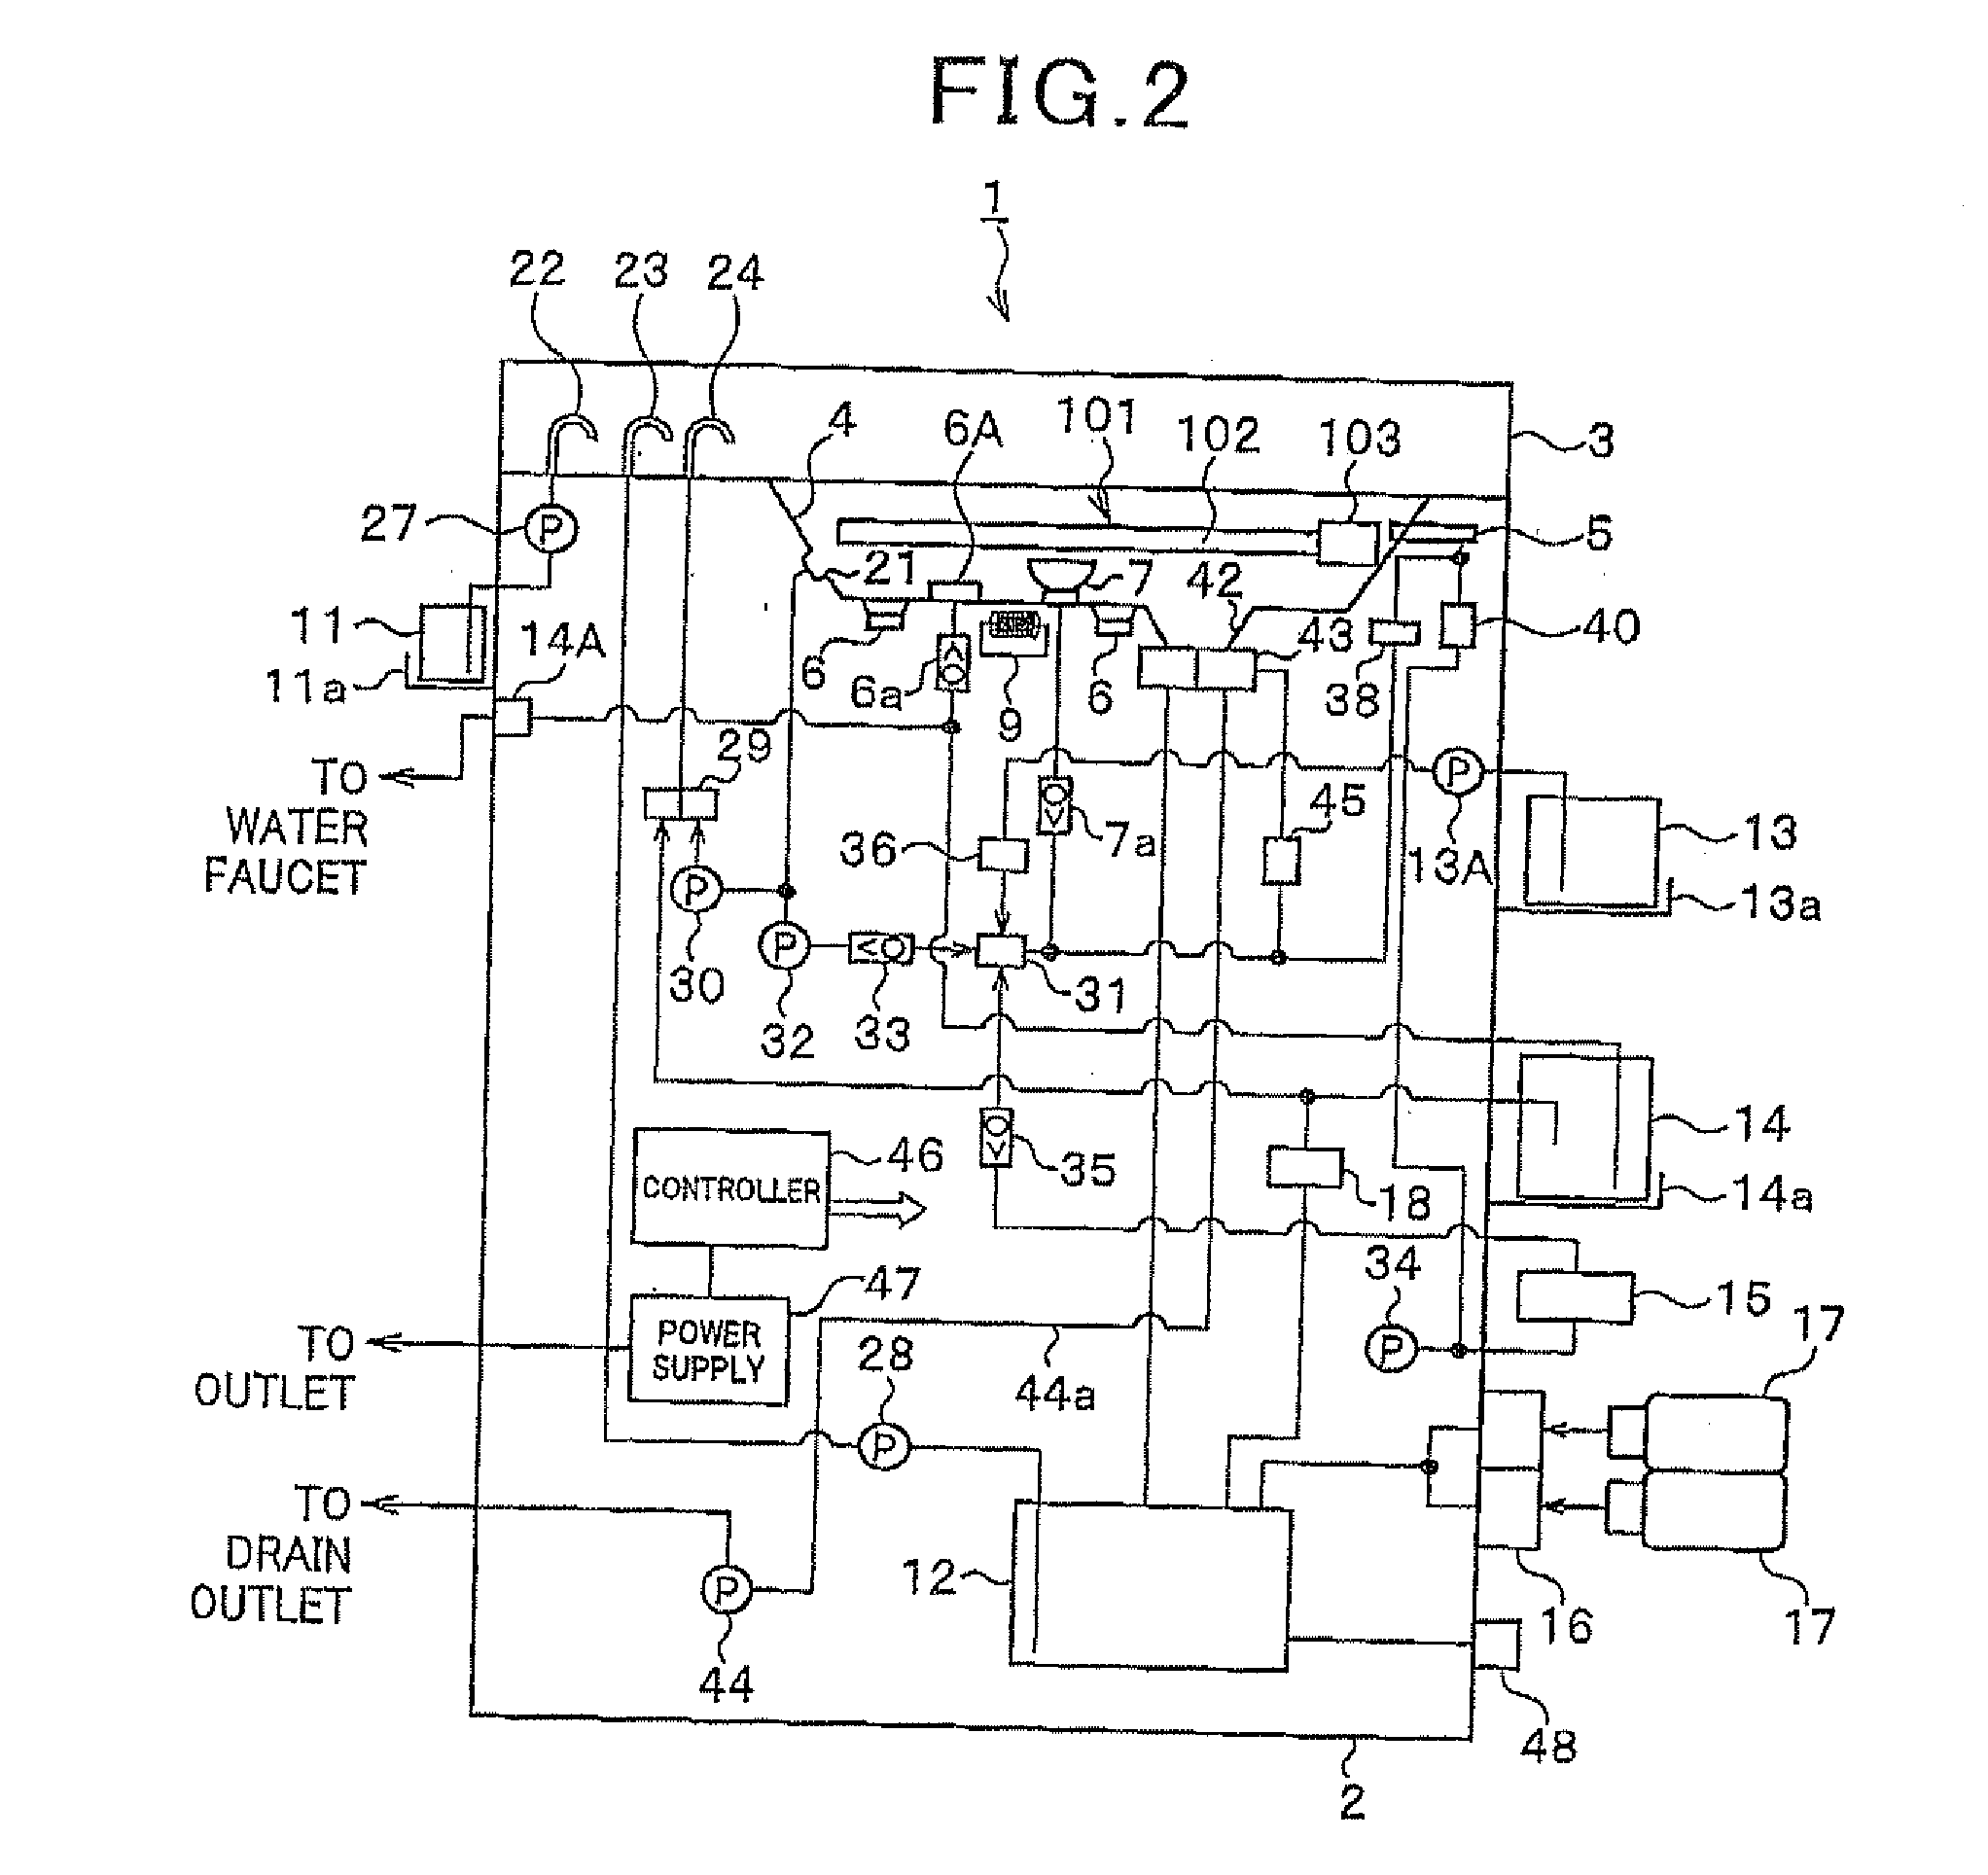 Endoscope washer disinfector equipped with nozzle connectable to endoscopic channels automatically